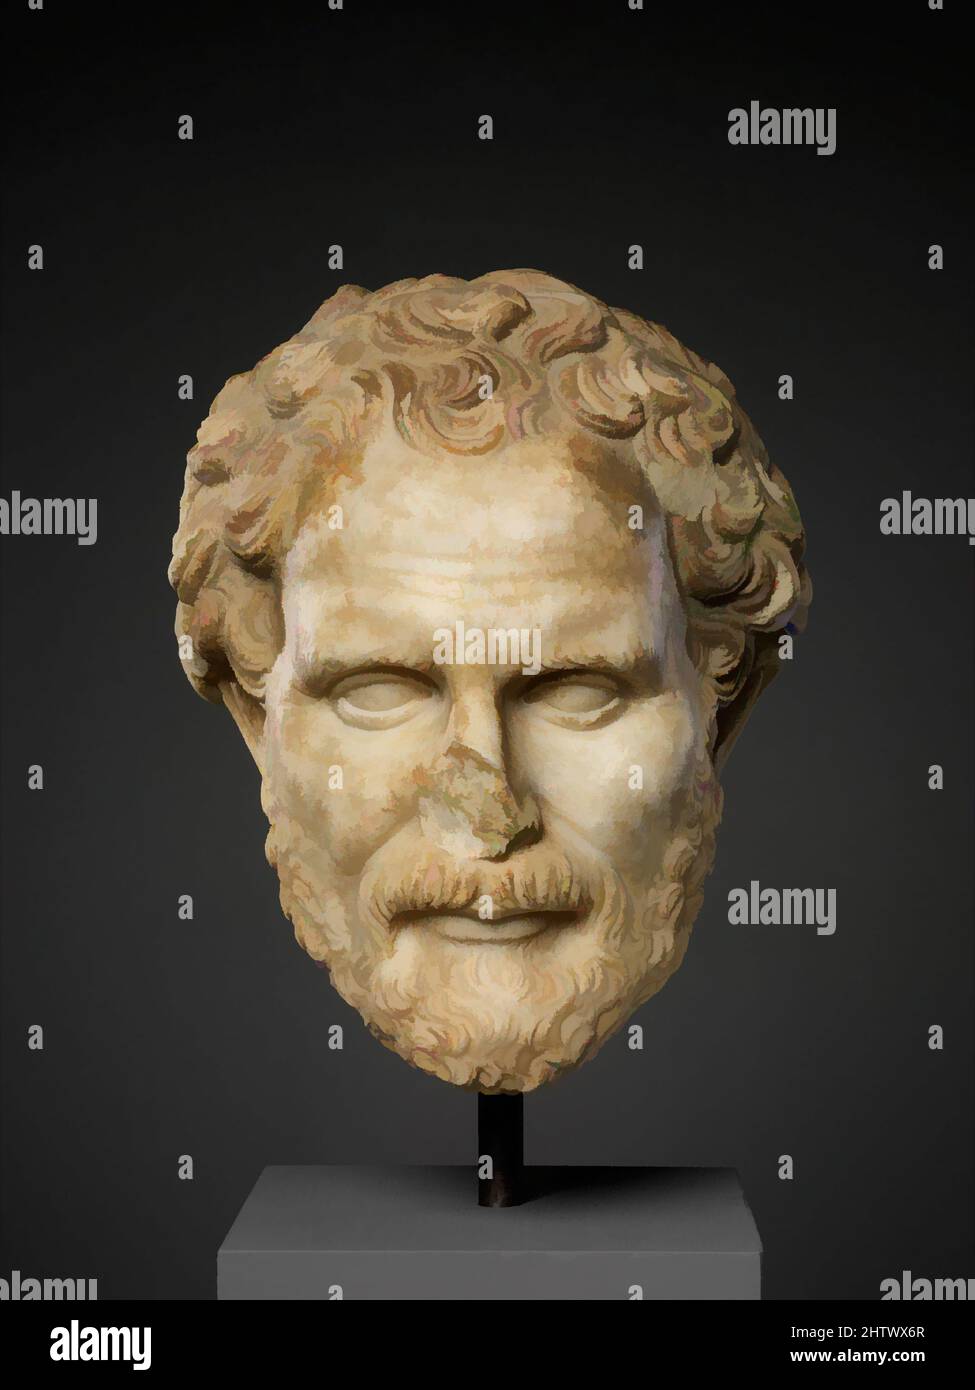 Art inspired by Marble head of Demosthenes, Imperial, 2nd century A.D., Roman, Marble, Overall: 11 x 8 5/8 x 9 in. (27.9 x 21.9 x 22.9 cm), Stone Sculpture, Copy of a Greek bronze statue by Polyeuktos of ca. 280 B.C.. Demosthenes (ca. 384–322 b.c.) of Athens is widely considered the, Classic works modernized by Artotop with a splash of modernity. Shapes, color and value, eye-catching visual impact on art. Emotions through freedom of artworks in a contemporary way. A timeless message pursuing a wildly creative new direction. Artists turning to the digital medium and creating the Artotop NFT Stock Photo